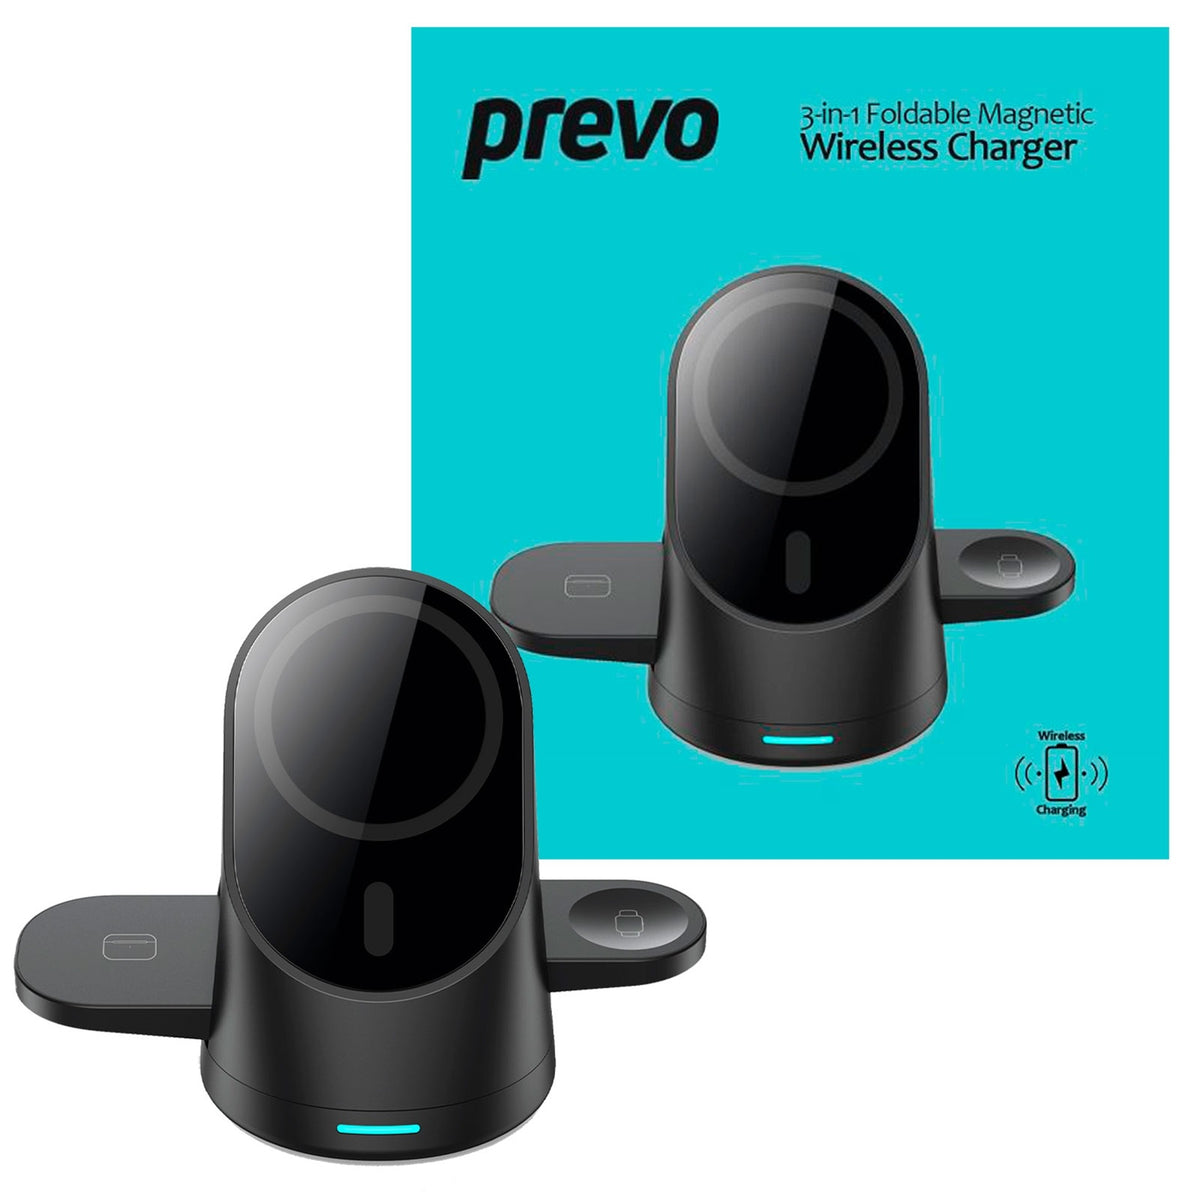 Prevo 3in1 25W Foldable Magnetic Wireless Charging Station - Black | 111323 from Prevo - DID Electrical